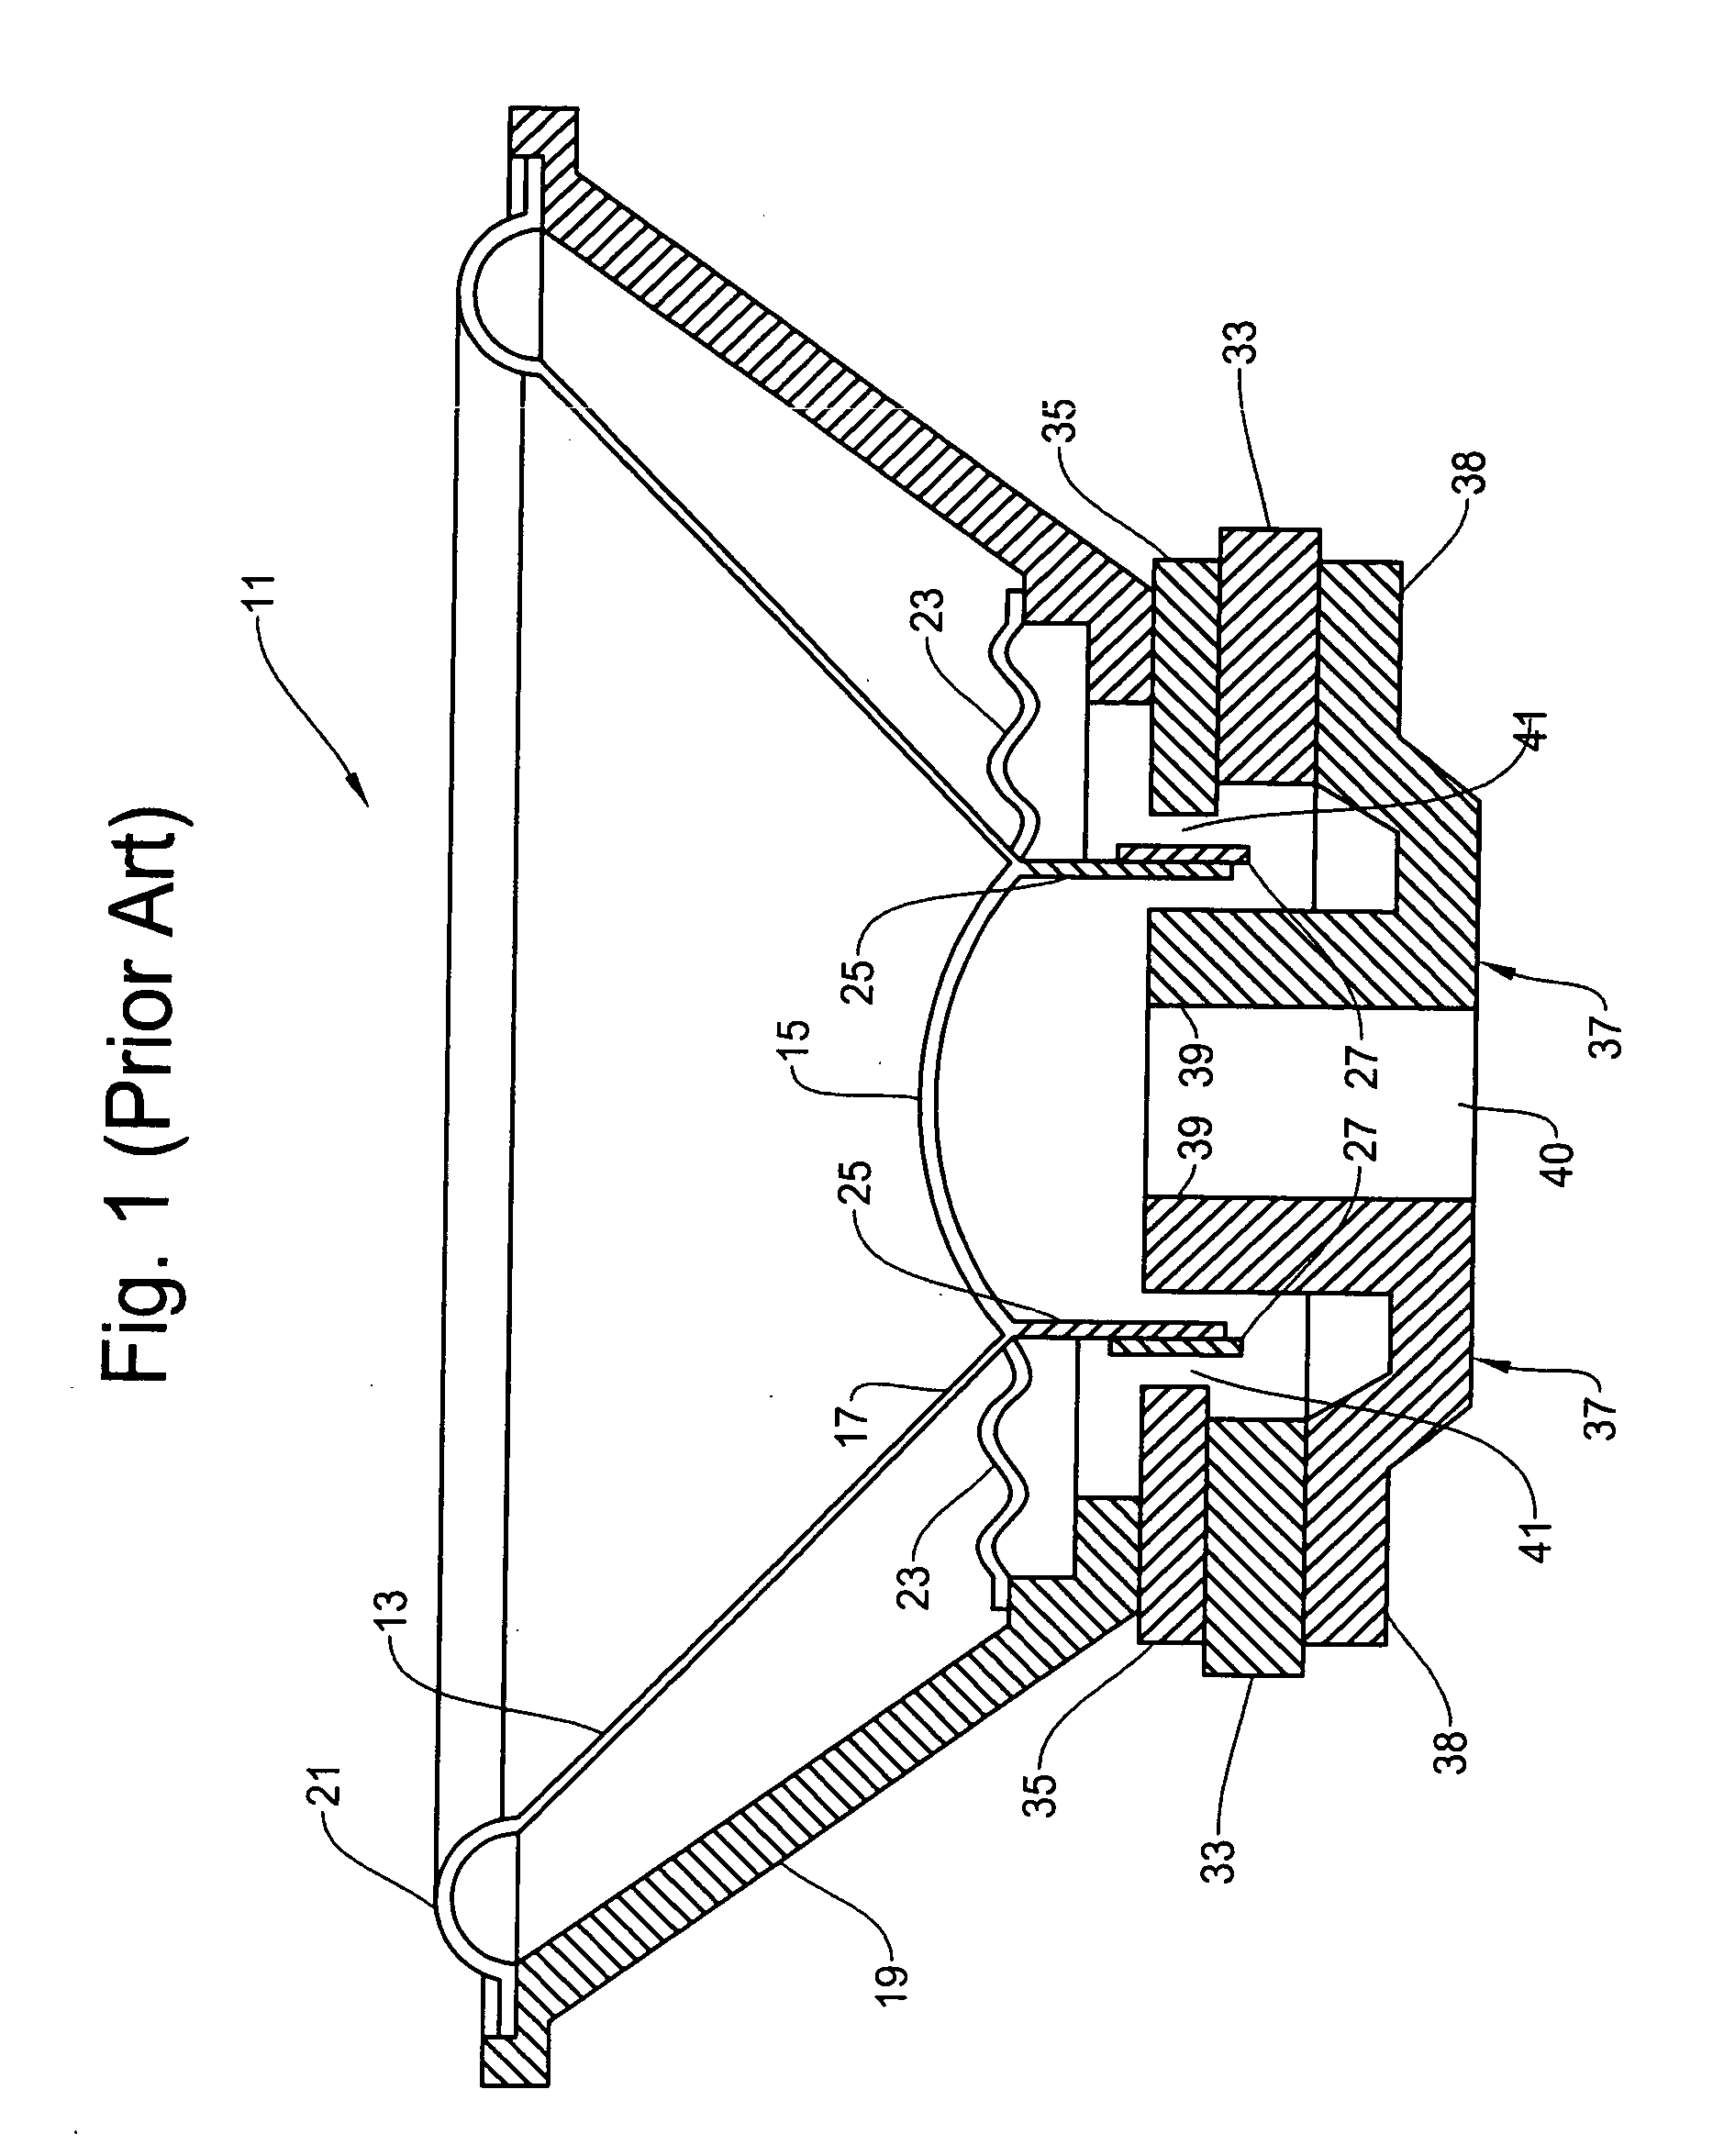 Thermal management system for loudspeaker having internal heat sink and vented top plate